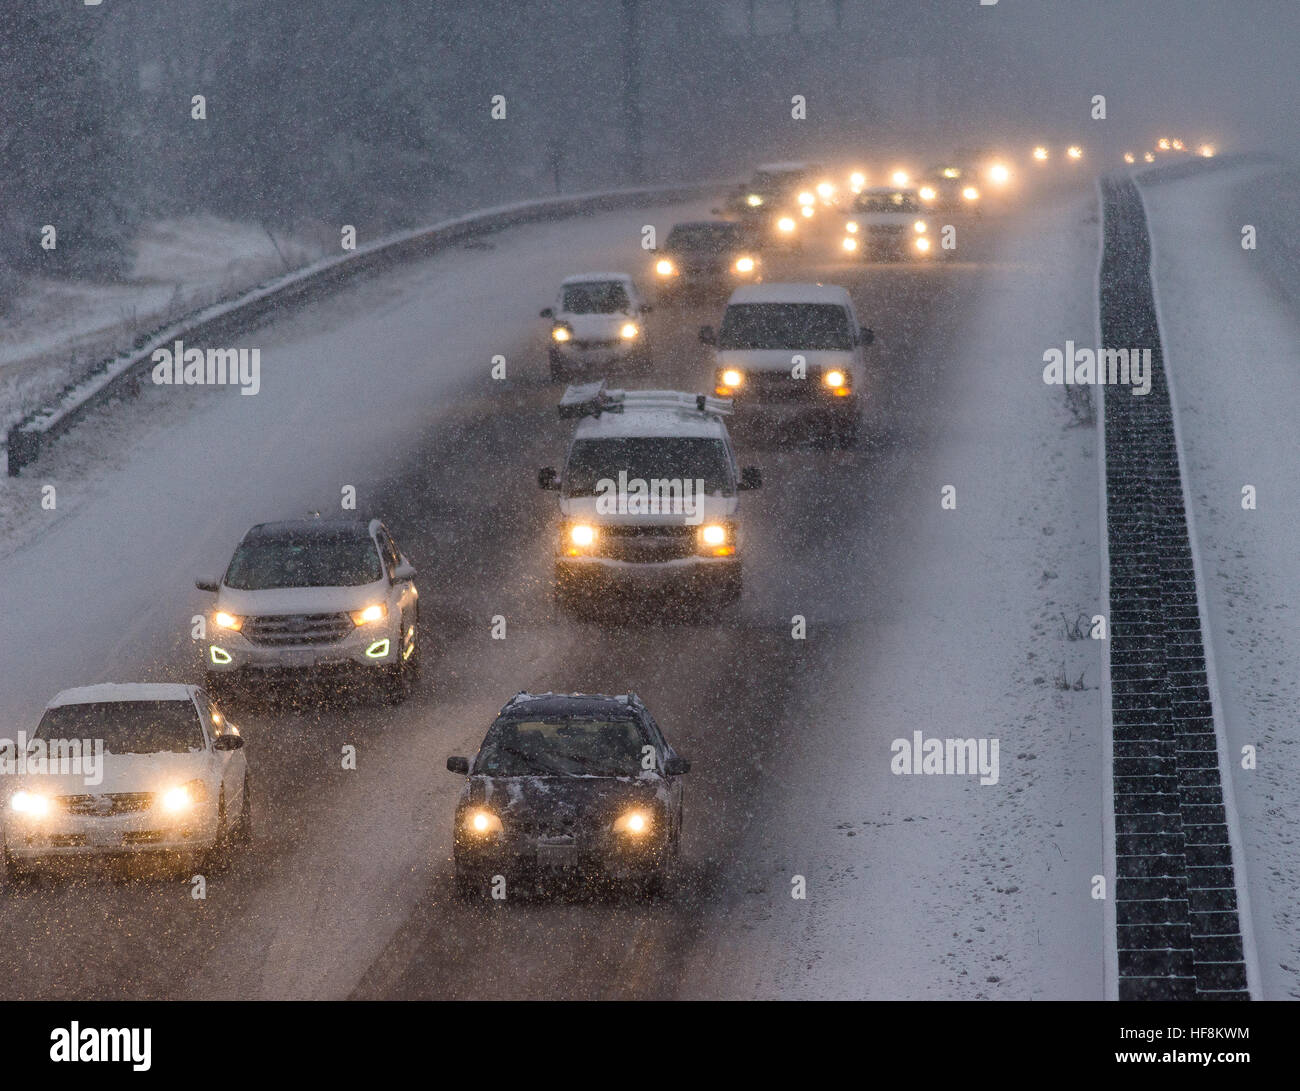 Westminster, Massachusetts, USA. 29 December, 2016. A winter storm projected to bring about a foot of snow to north central Massachusetts impacts the afternoon commute along Rt 2 in Westminster, Mass. Many motor vehicle crashes were reported throughout the region. Oncoming traffic is headed westbound.   © Jim Marabello/ Alamy Live News Stock Photo